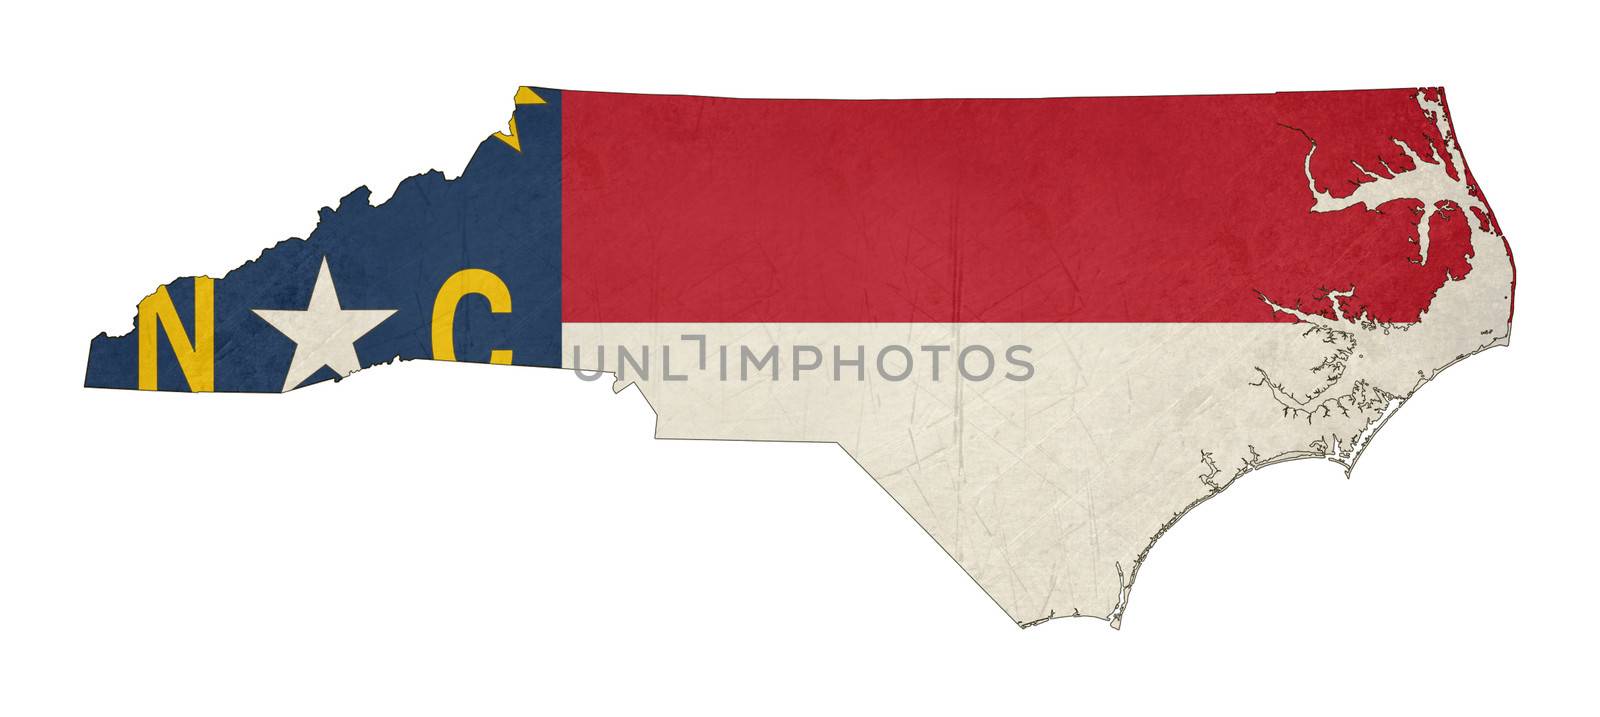 Grunge state of North Carolina flag map by speedfighter